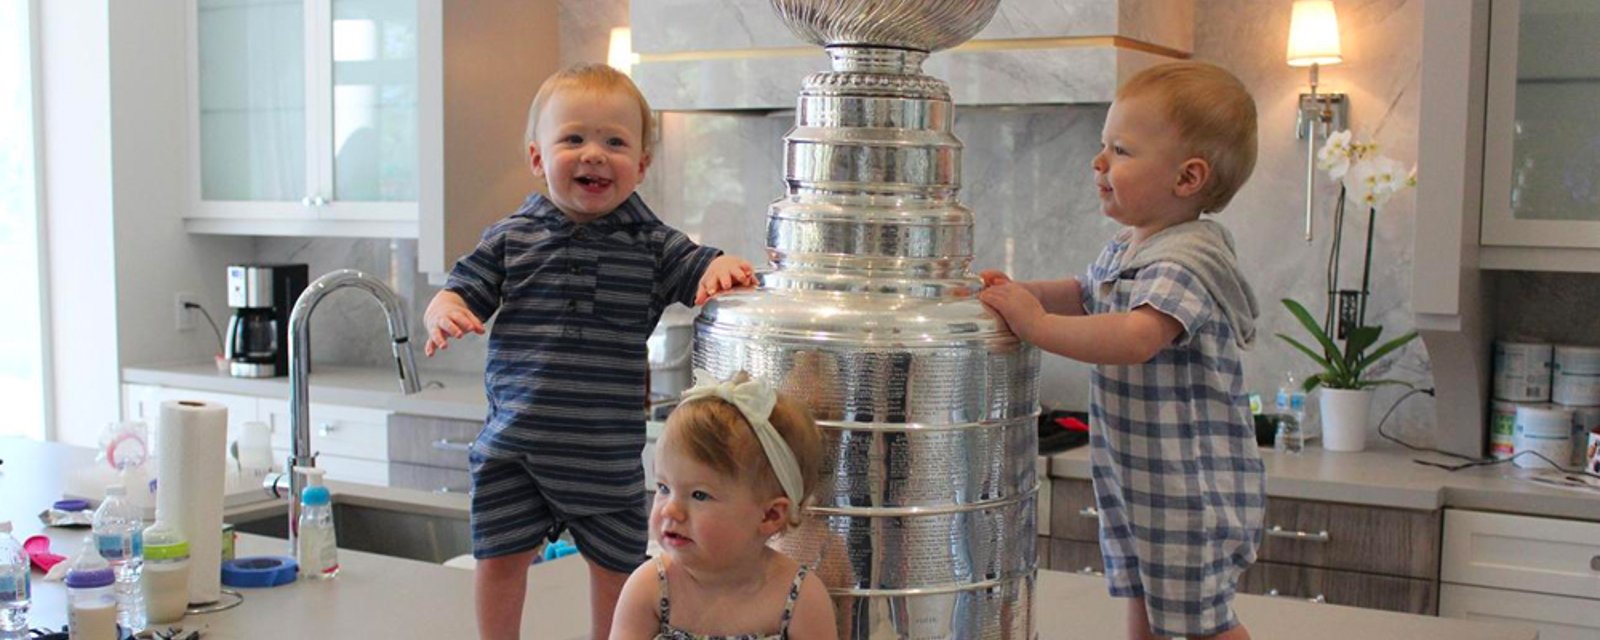 Report: Stanley Cup winners won't get their “day with the Cup”